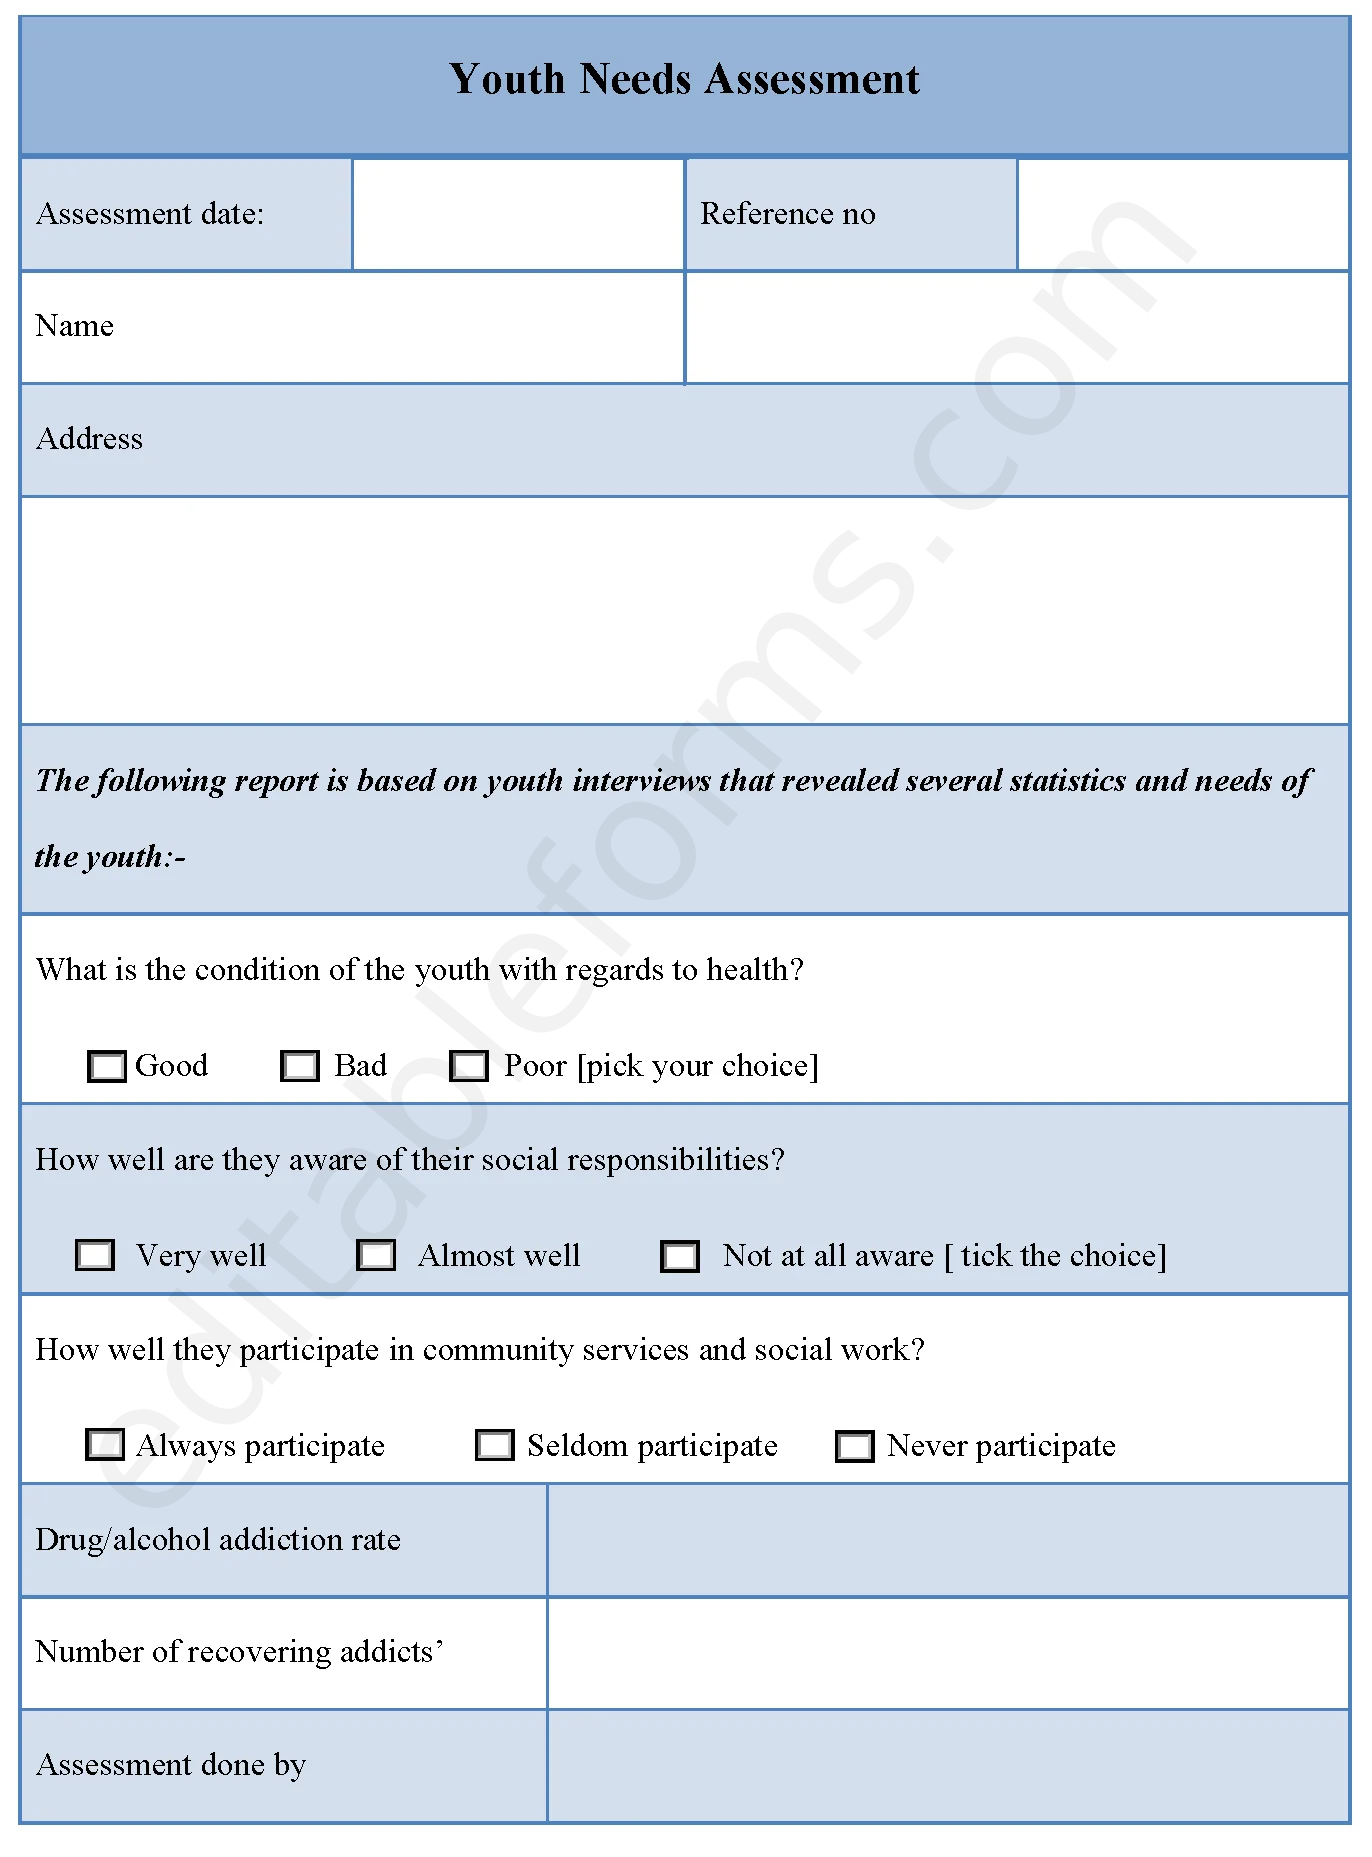 Youth Needs Assessment Fillable PDF Template